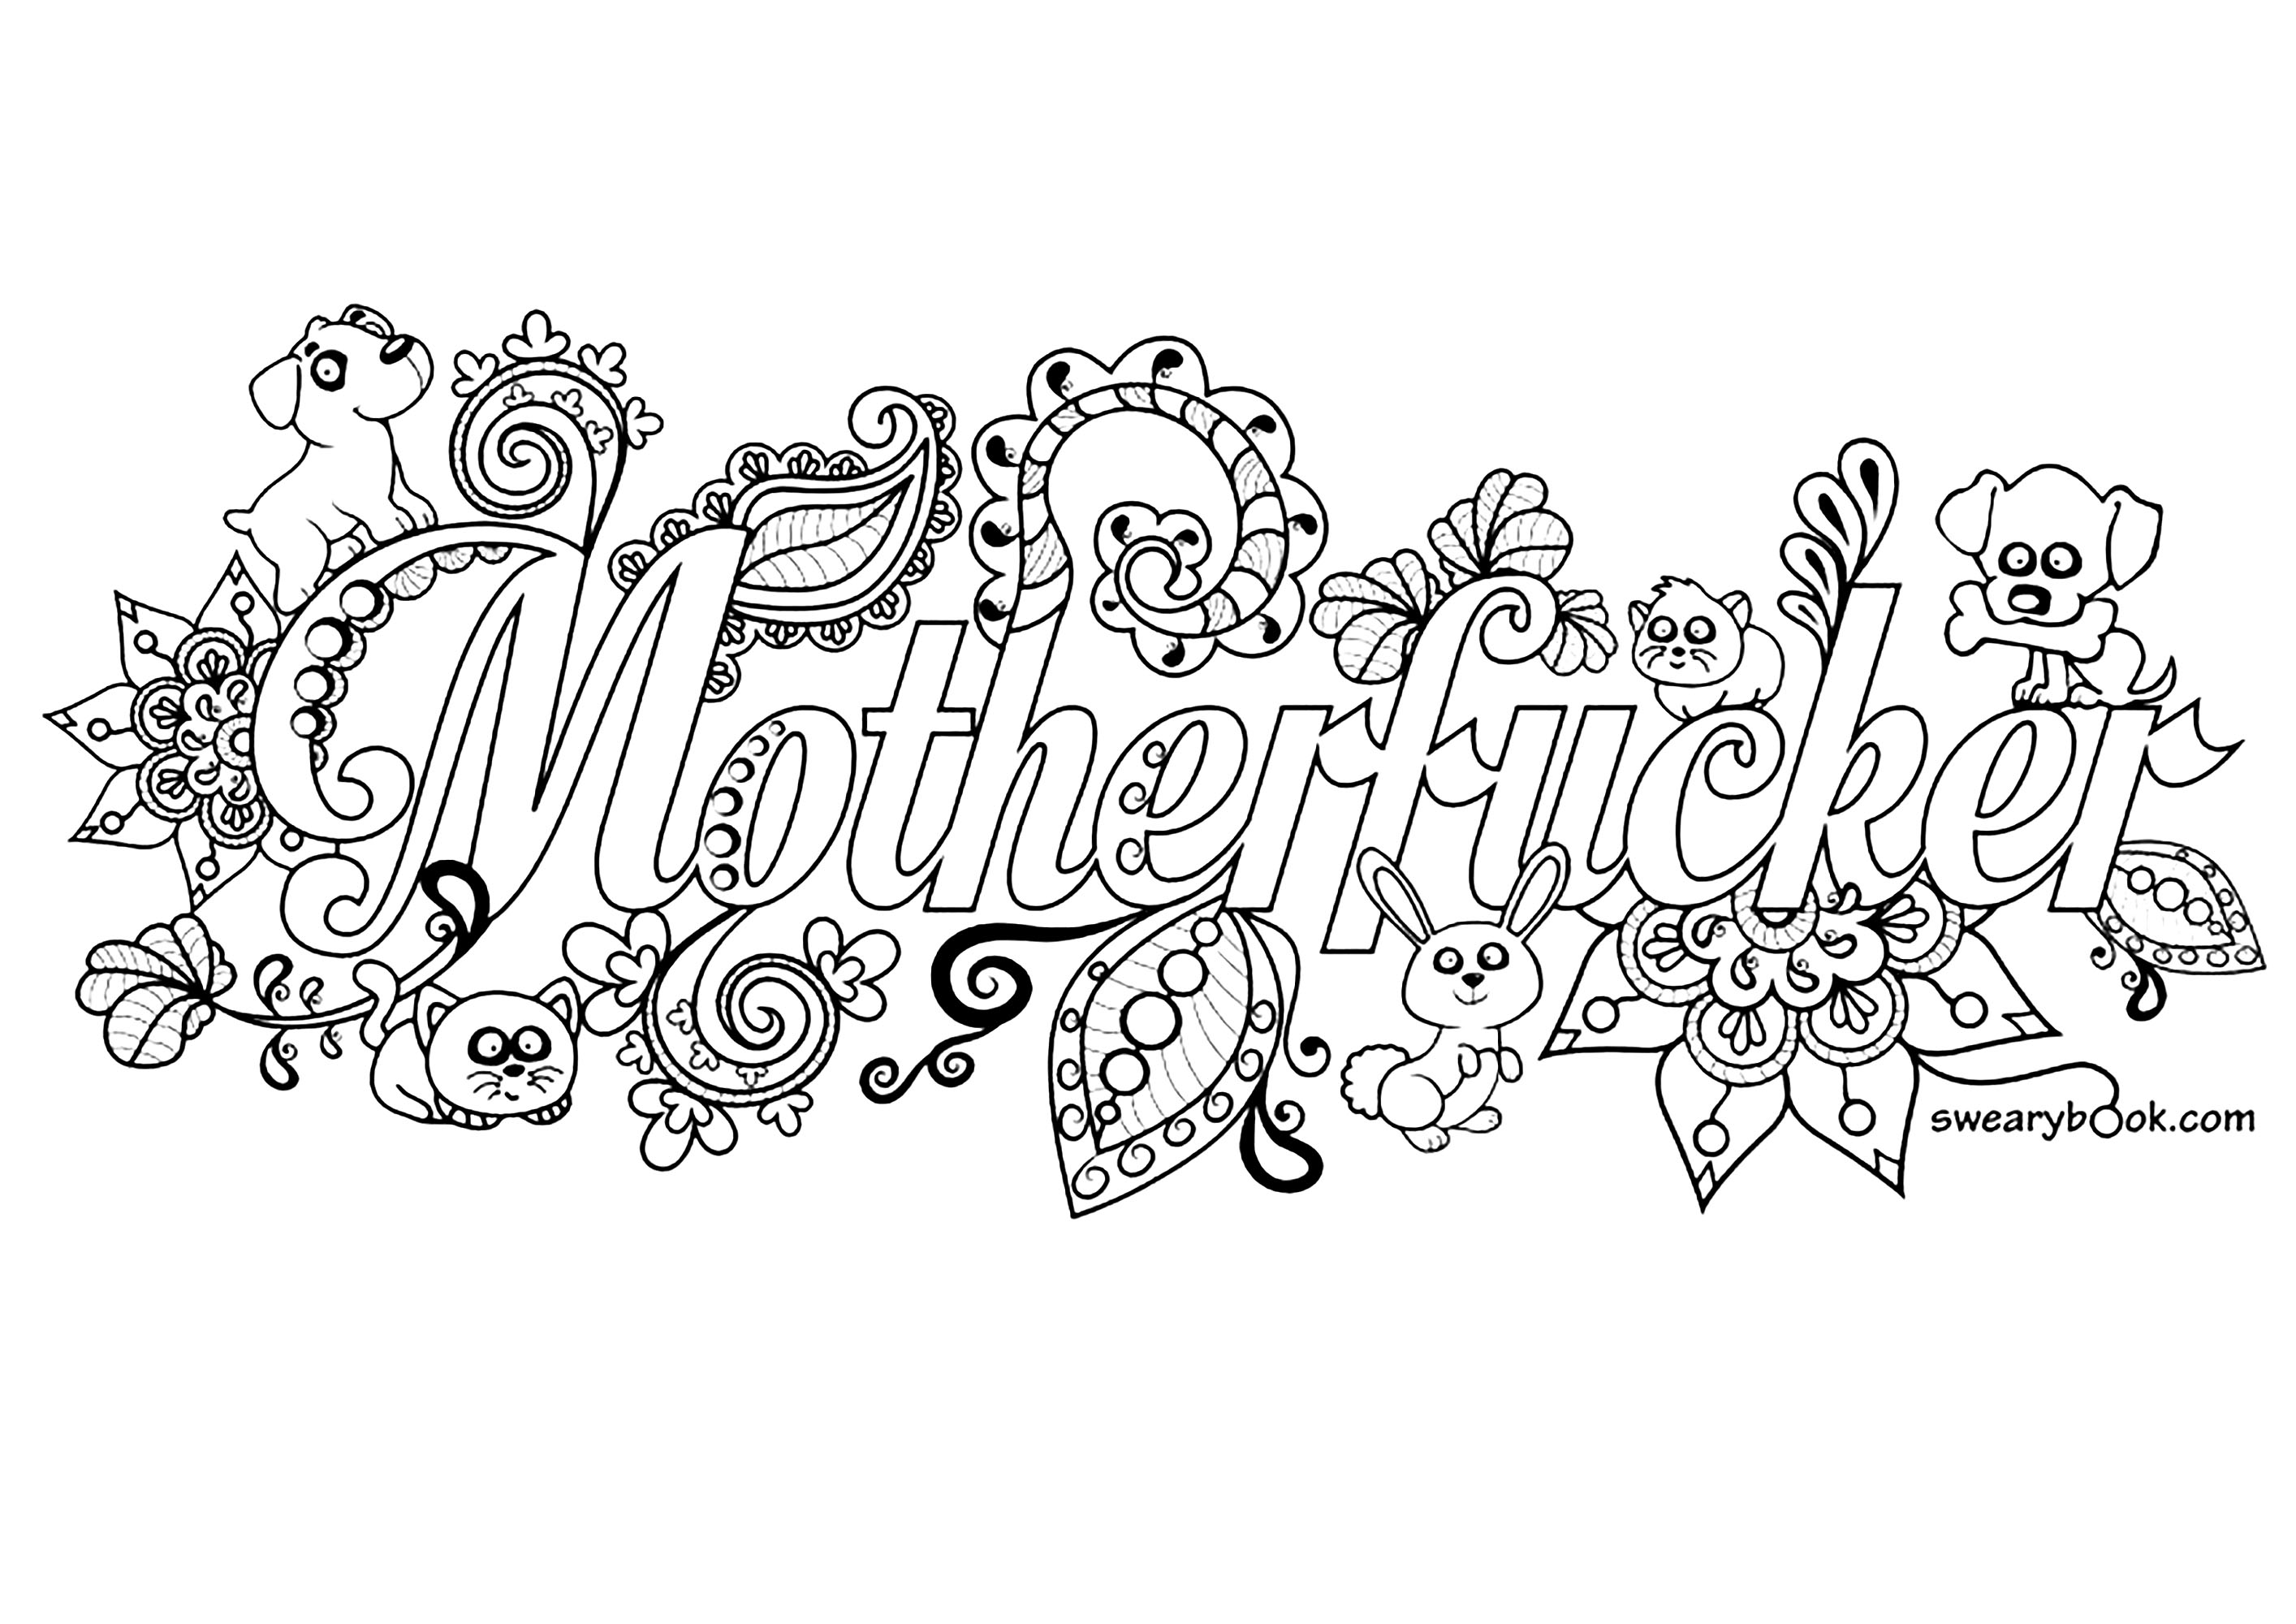 Motherfucker Swear word coloring page - Swear word Adult Coloring ...